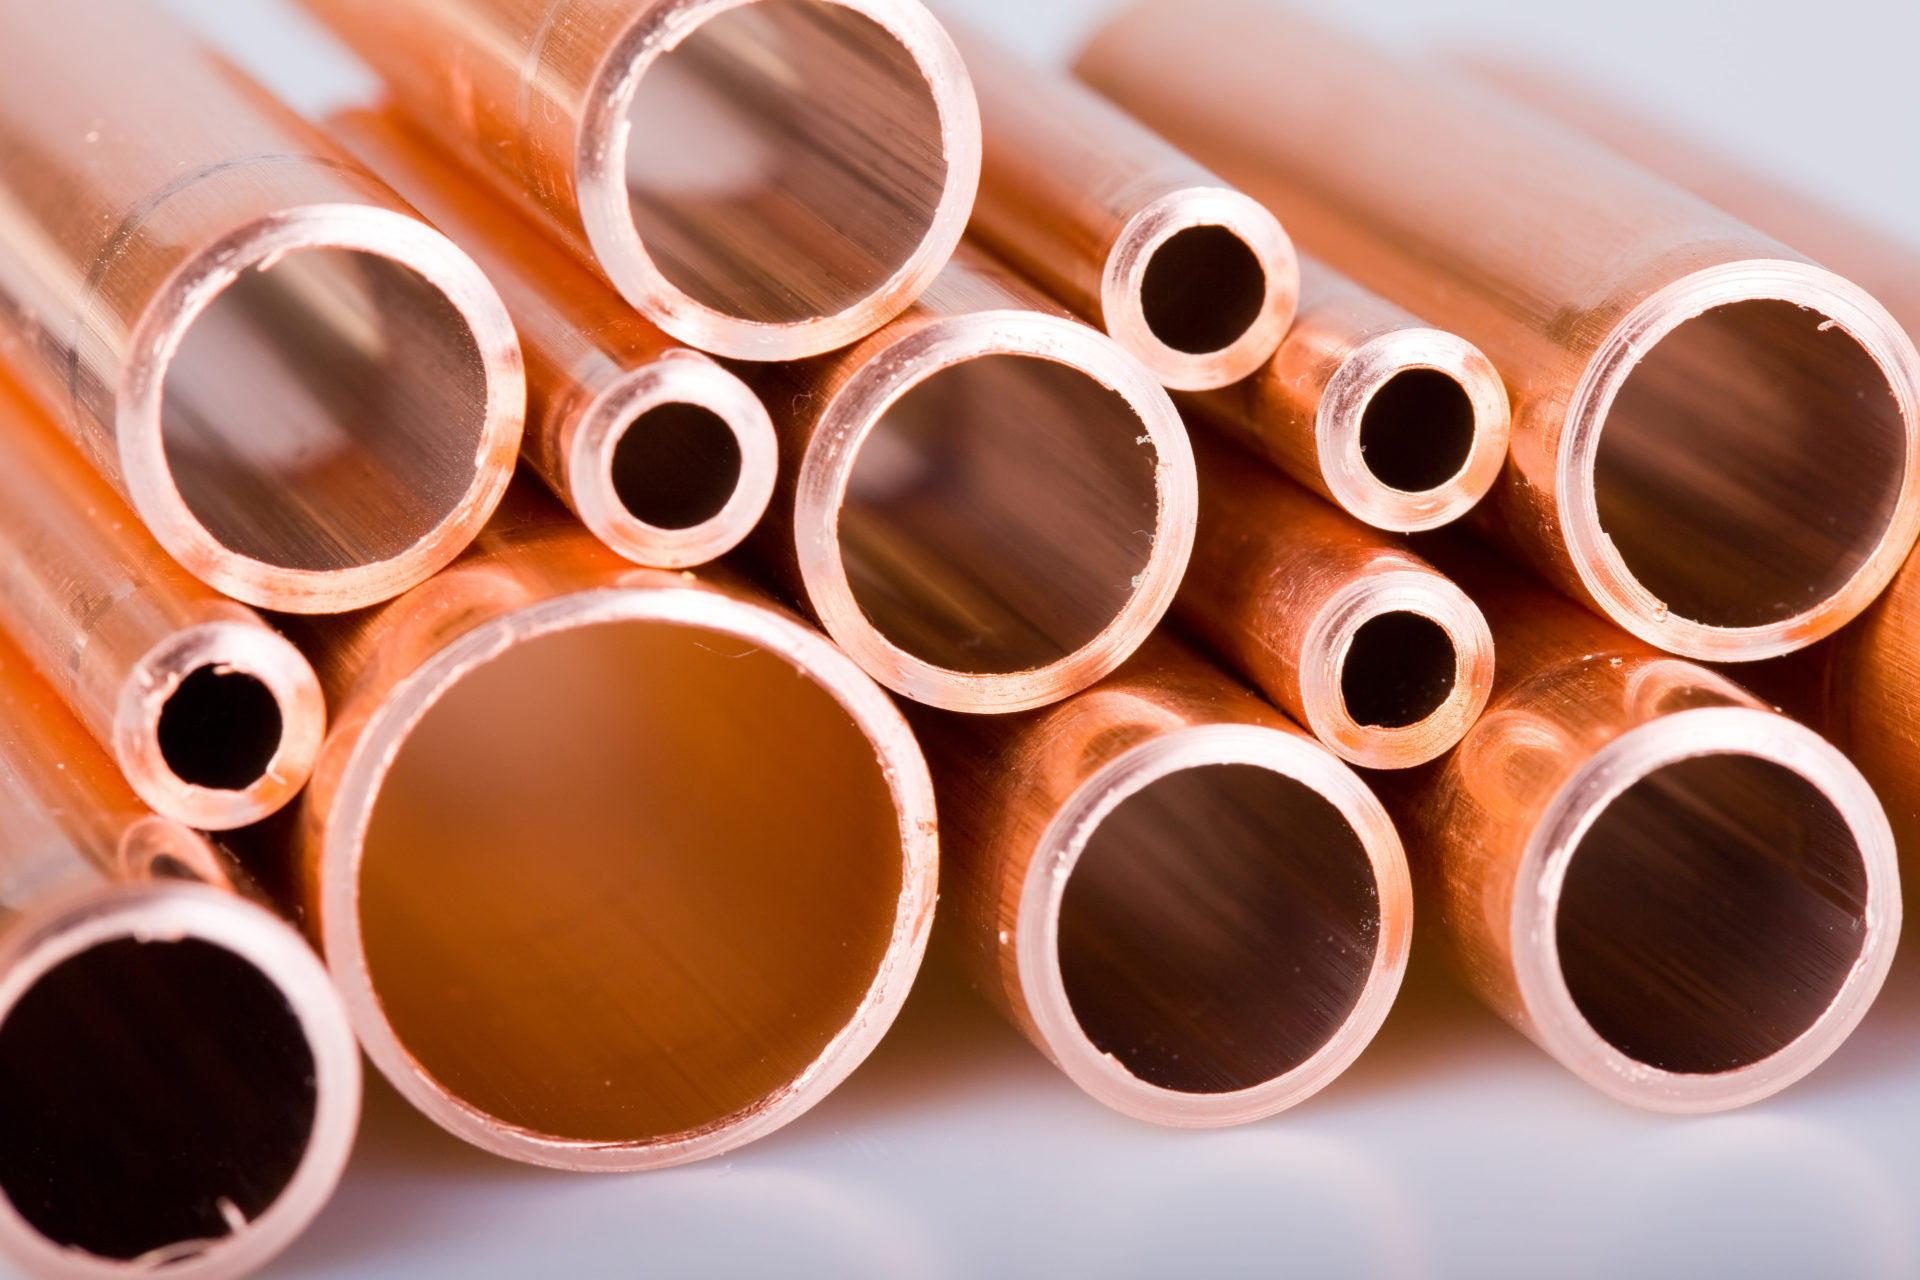 On the advantages of copper tube